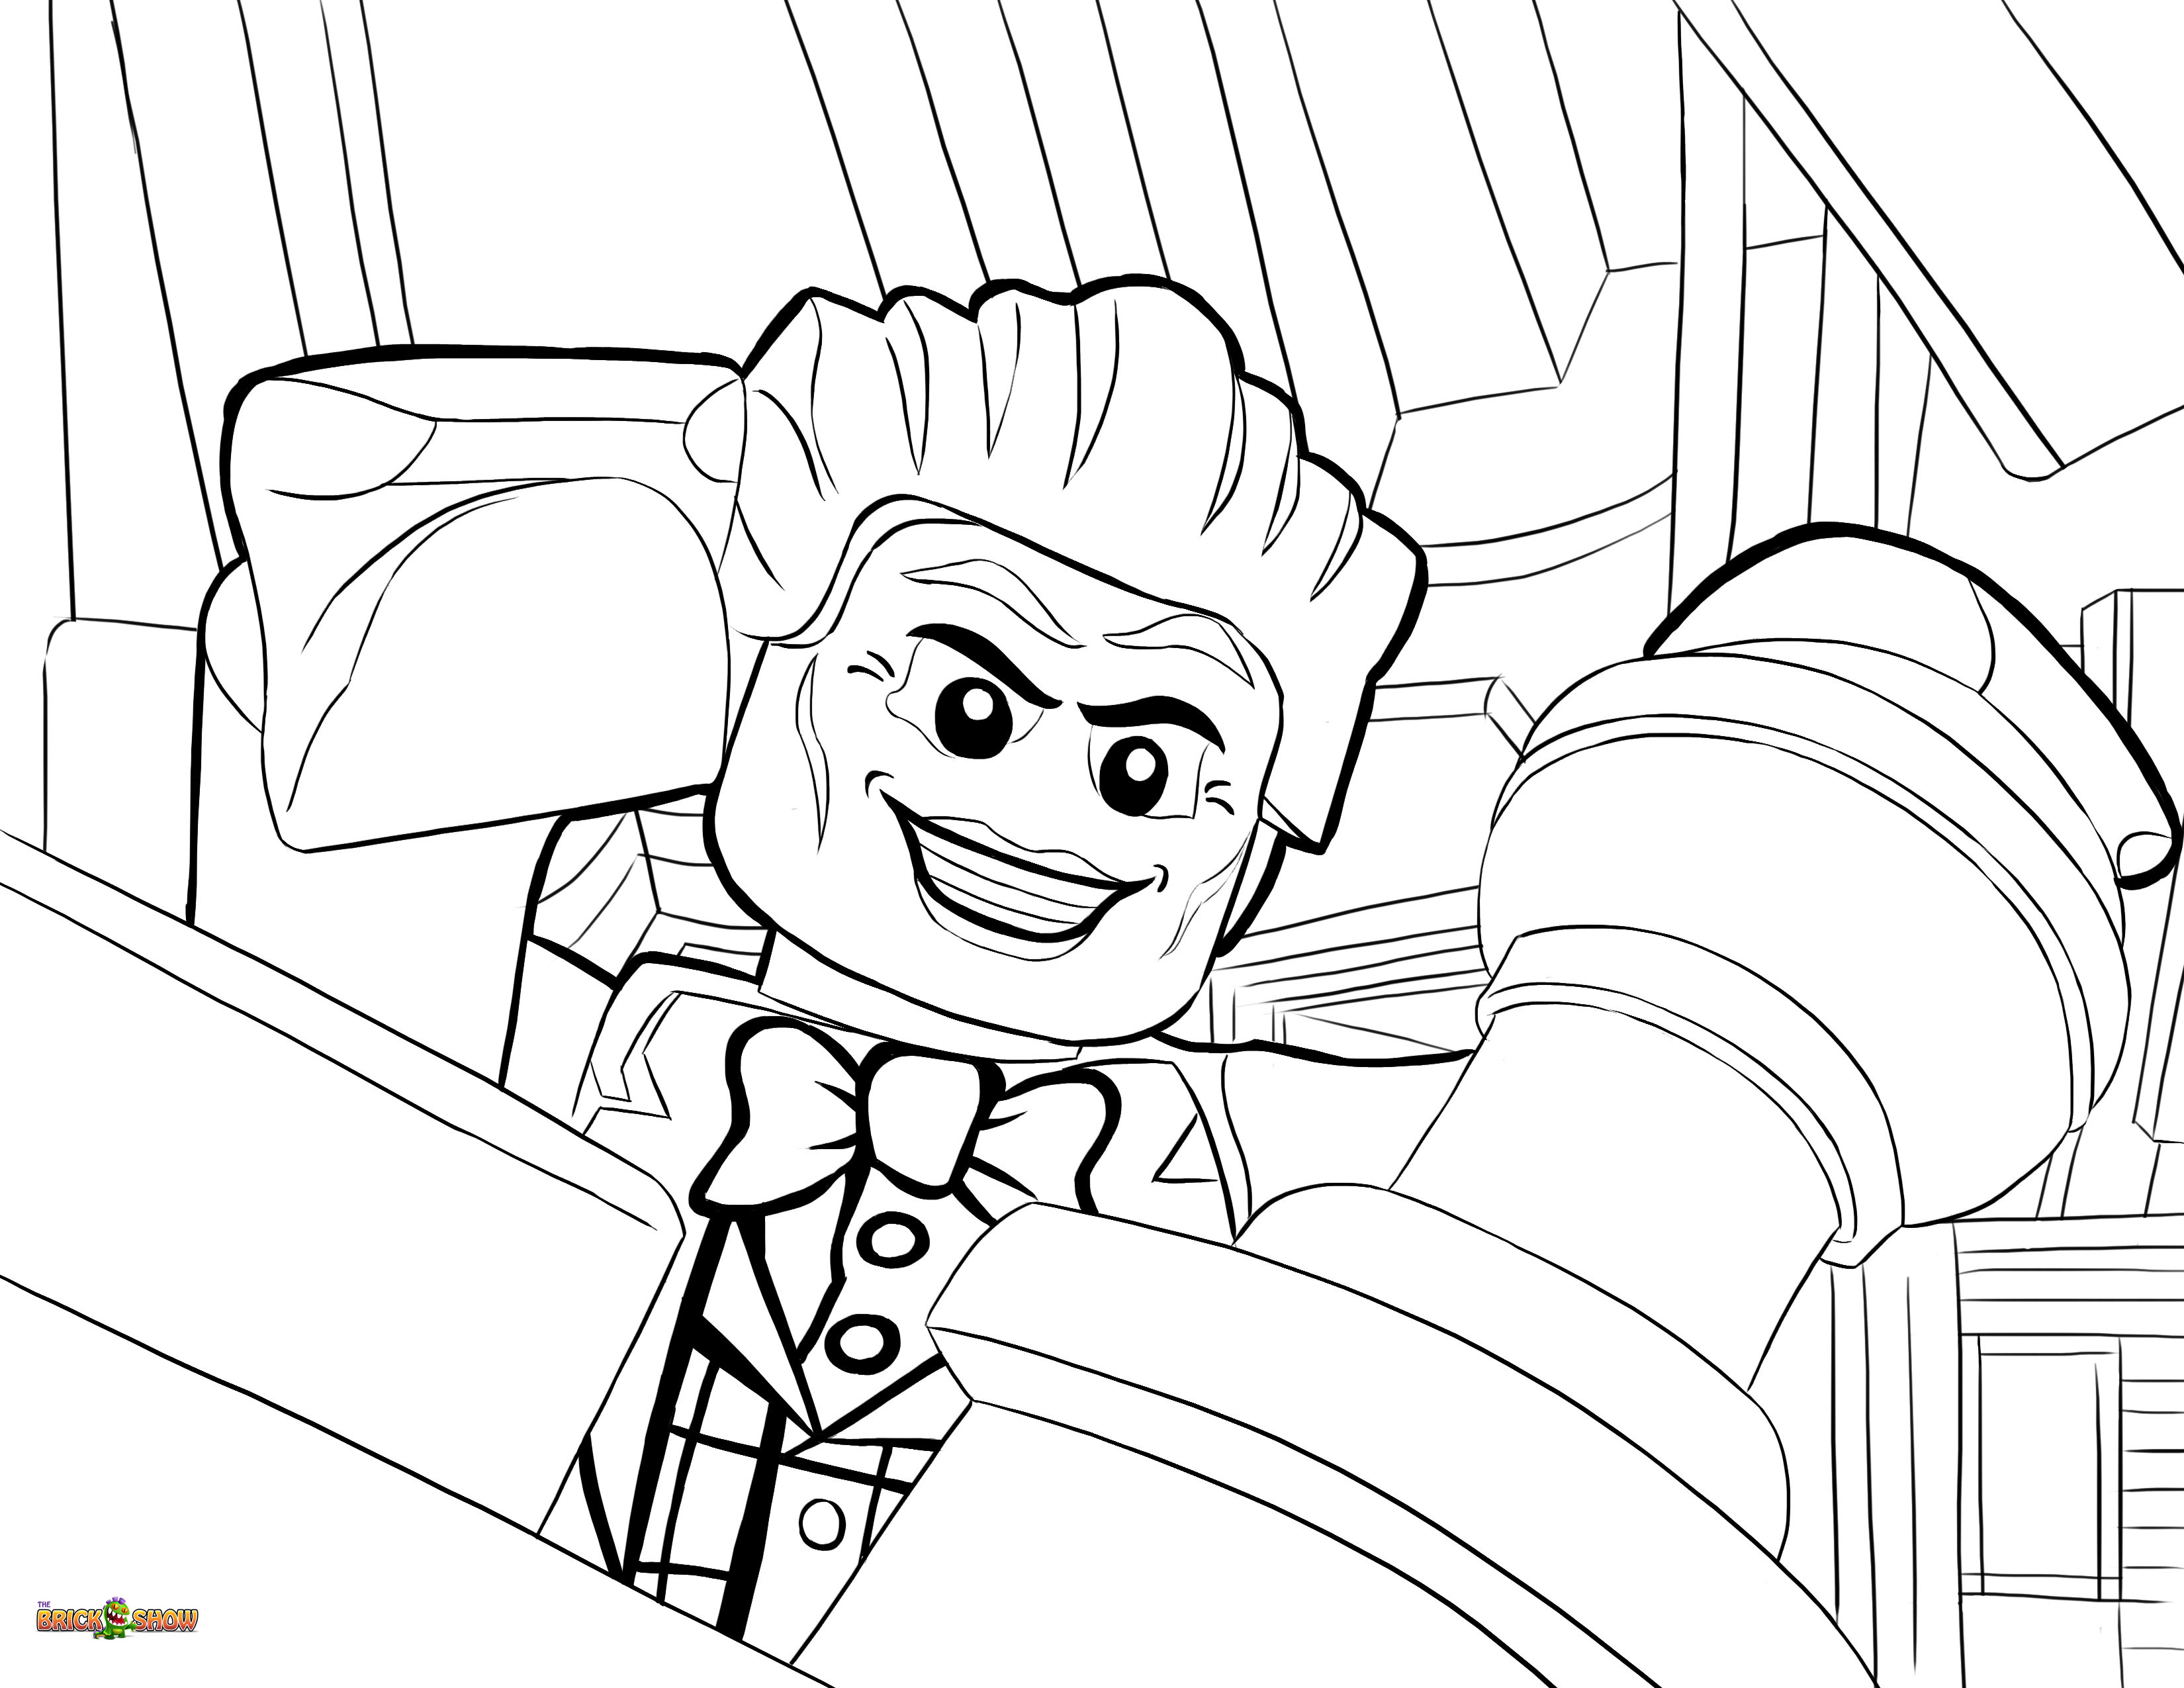 Joker Coloring Pages - Coloring Home